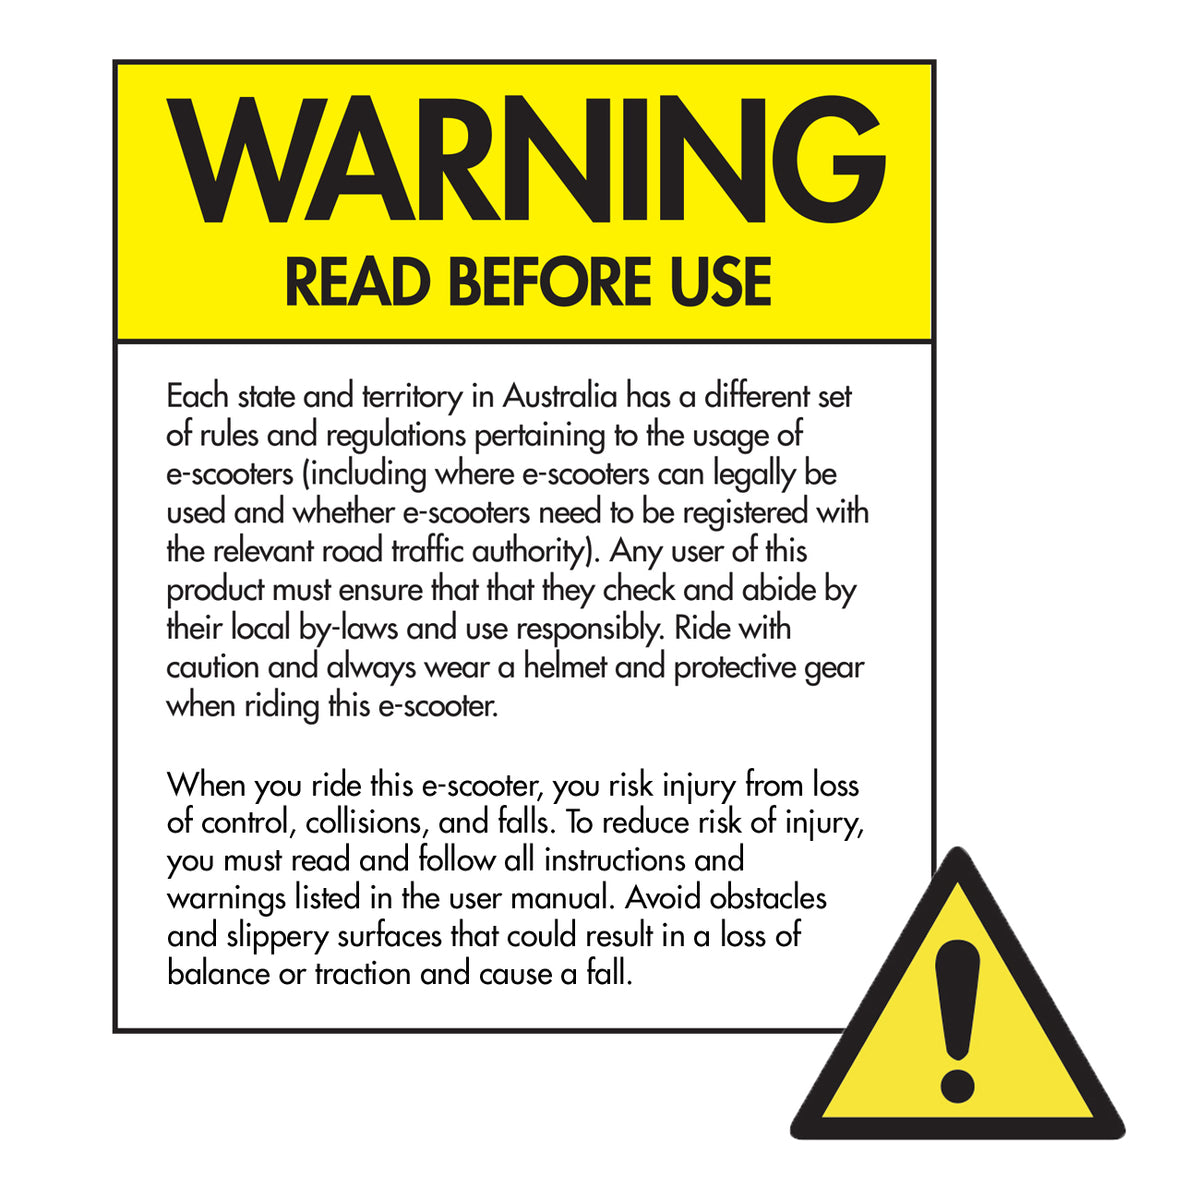 Scooter warning label about rules and regulations regarding riding electric scooters in Australia.